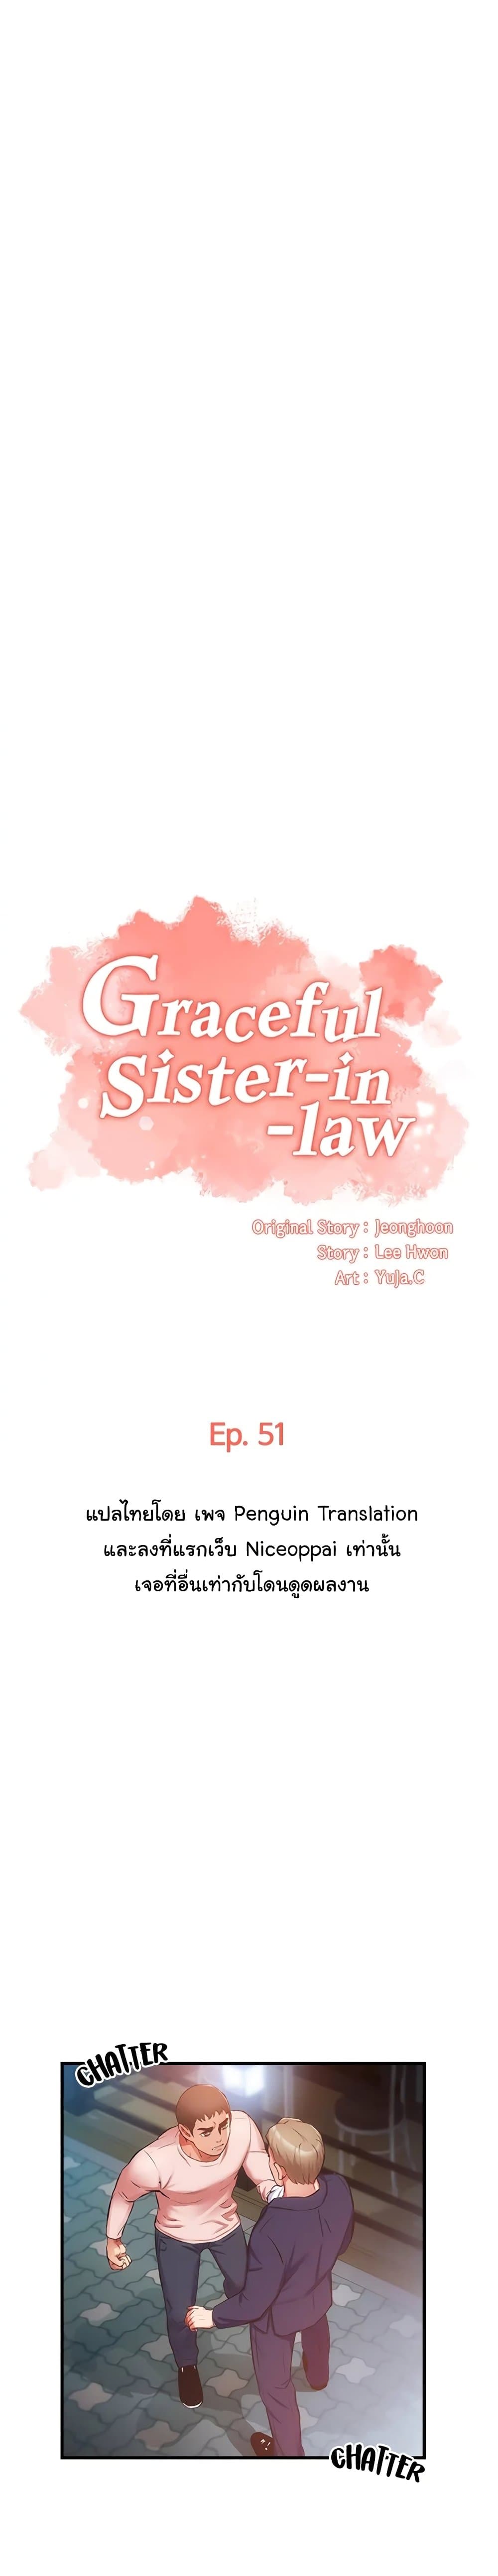 Brother's Wife Dignity 51 (1)